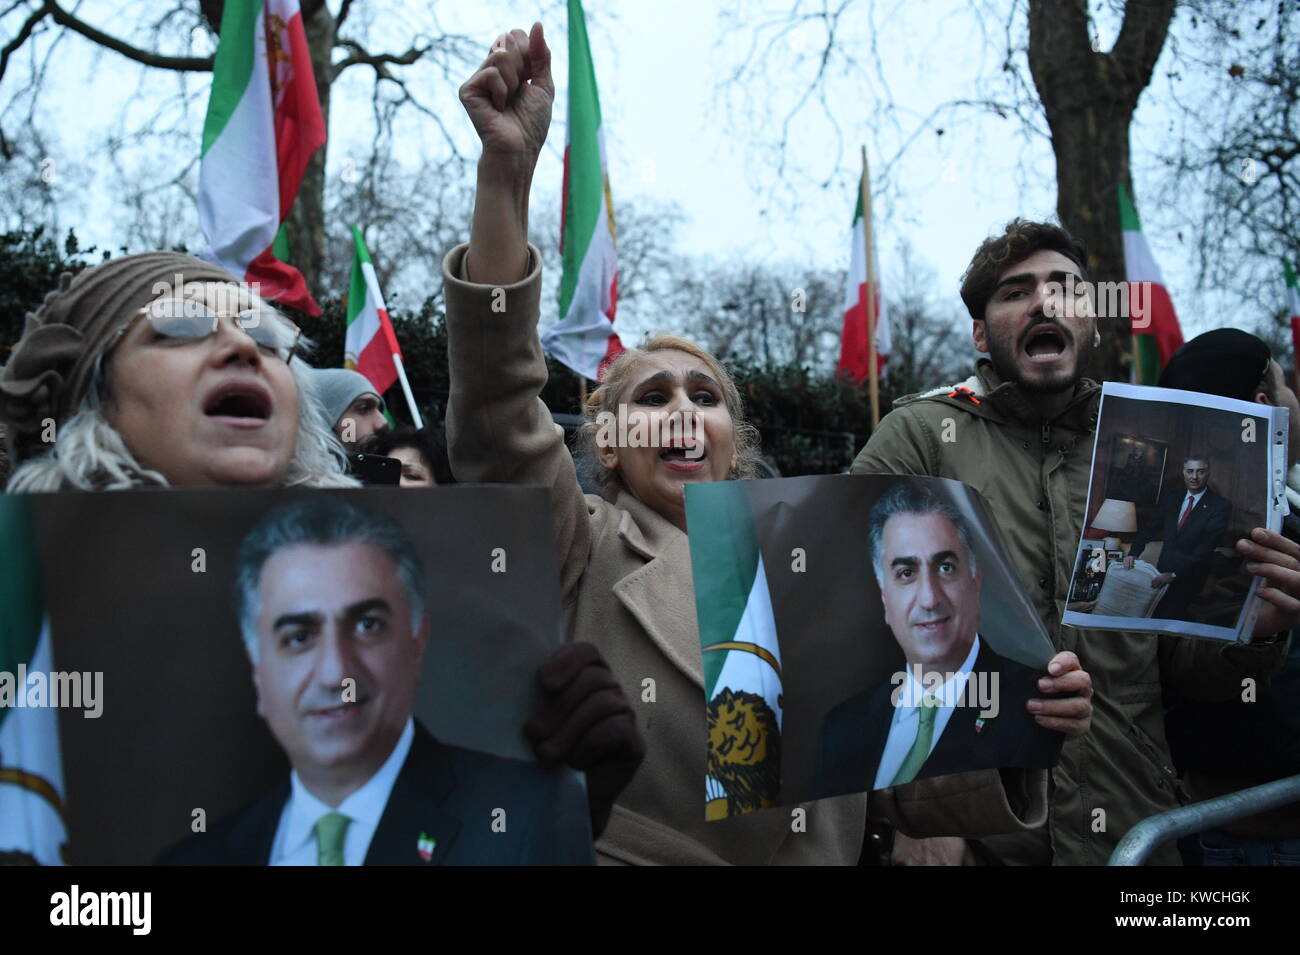 Supporters of the People's Mojahedin Organisation, Iran's main opposition, rallying outside the Iranian regime's embassy, London, in solidarity with Iranian people's protests nationwide. Stock Photo